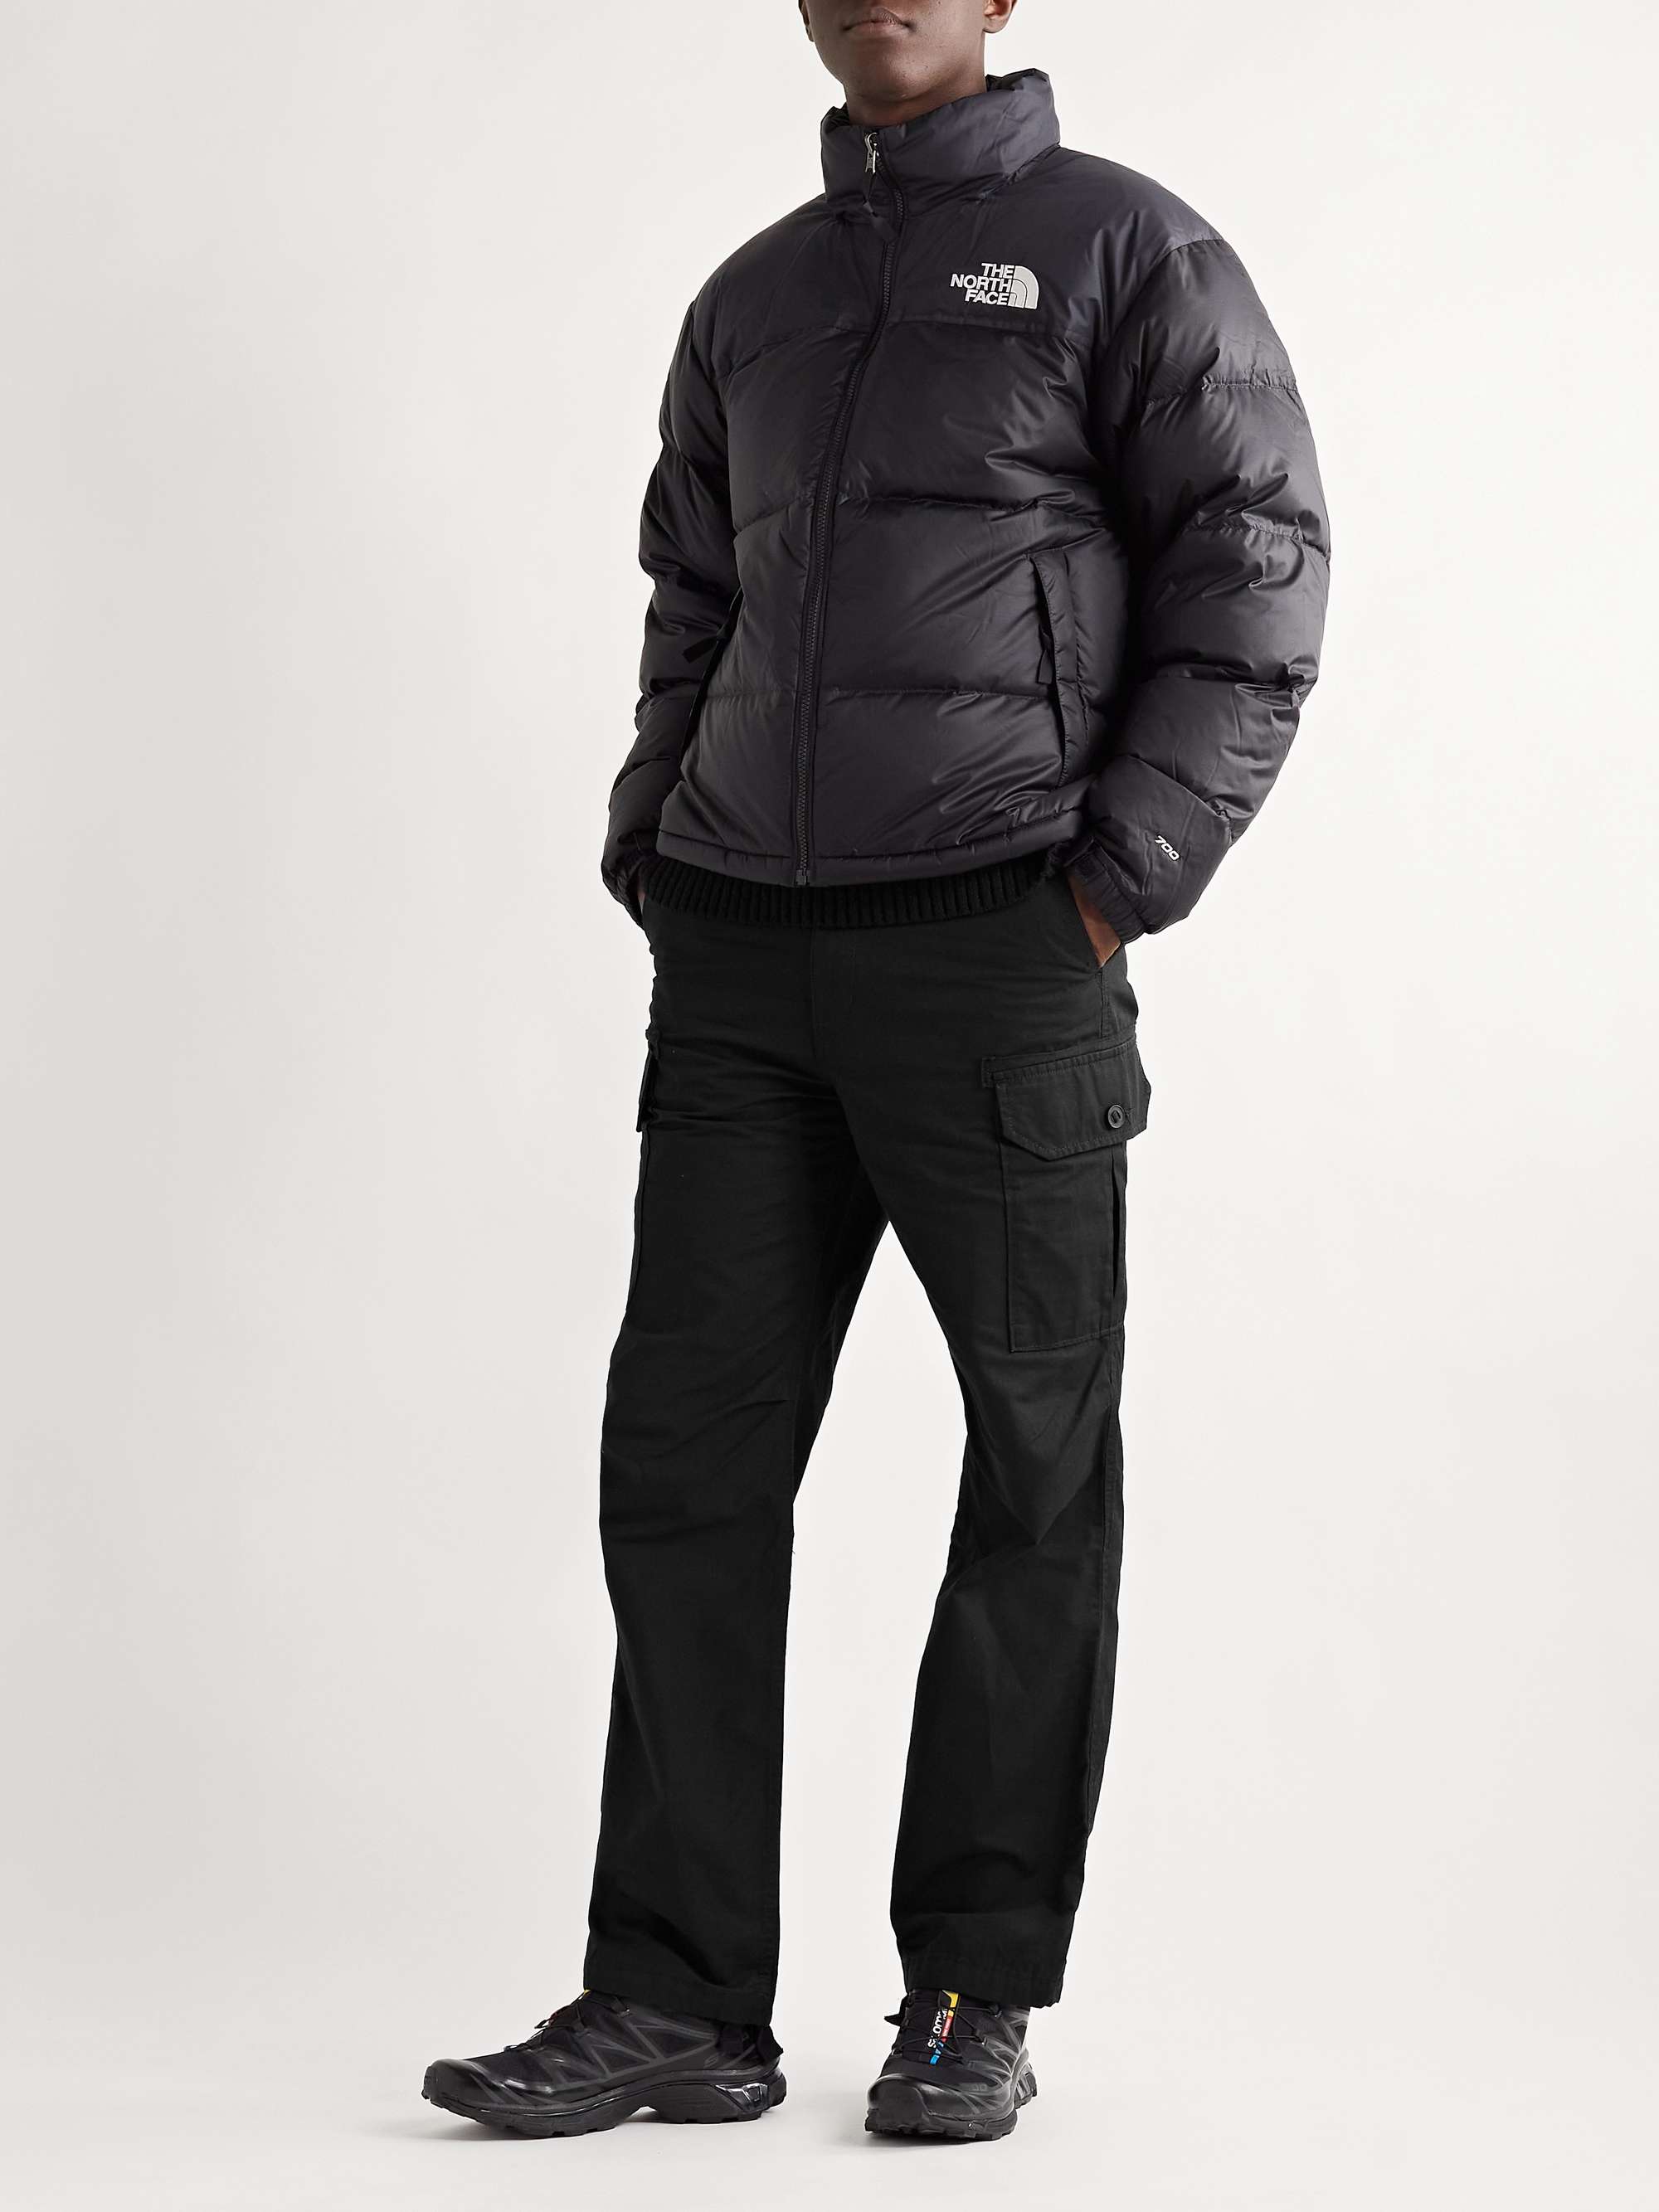 Black M66 Cotton-Ripstop Cargo Trousers | THE NORTH FACE | MR PORTER